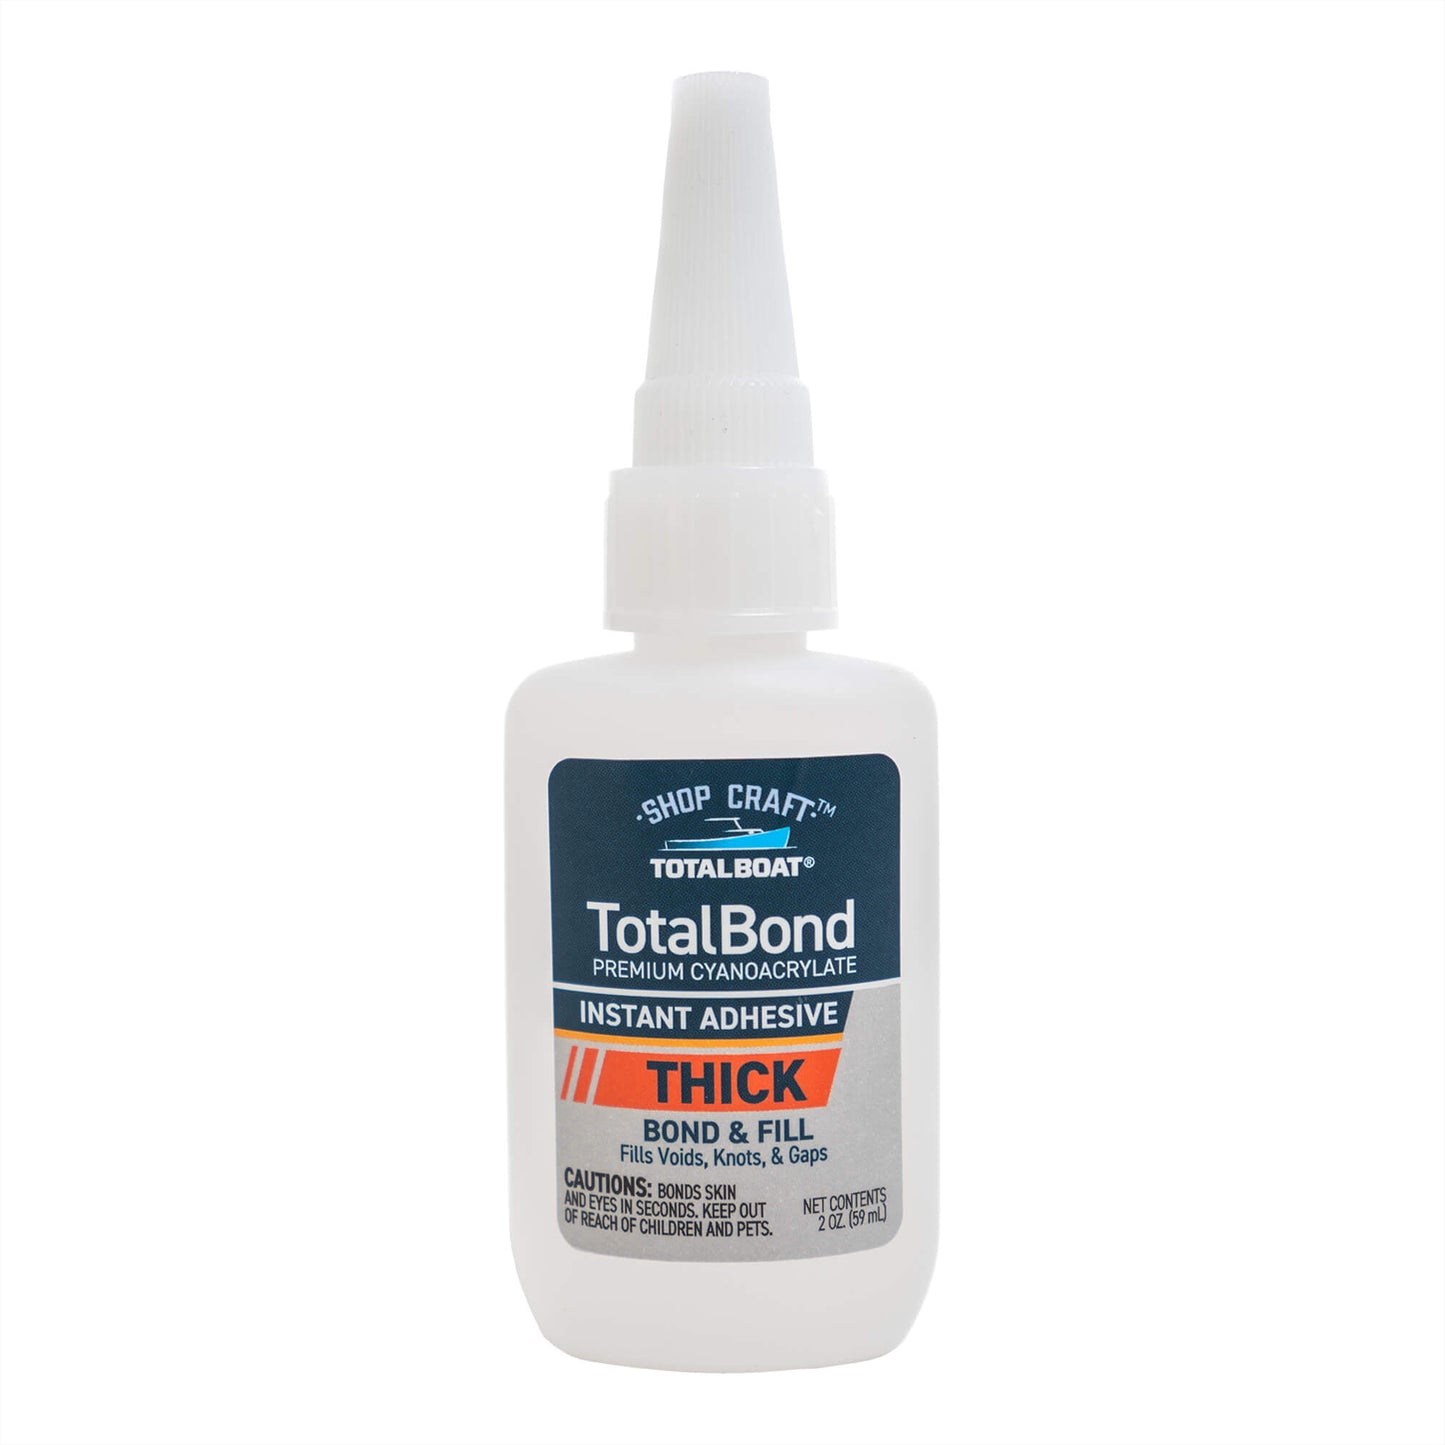 TotalBoat TotalBond Thick CA Glue to Bond and Fill